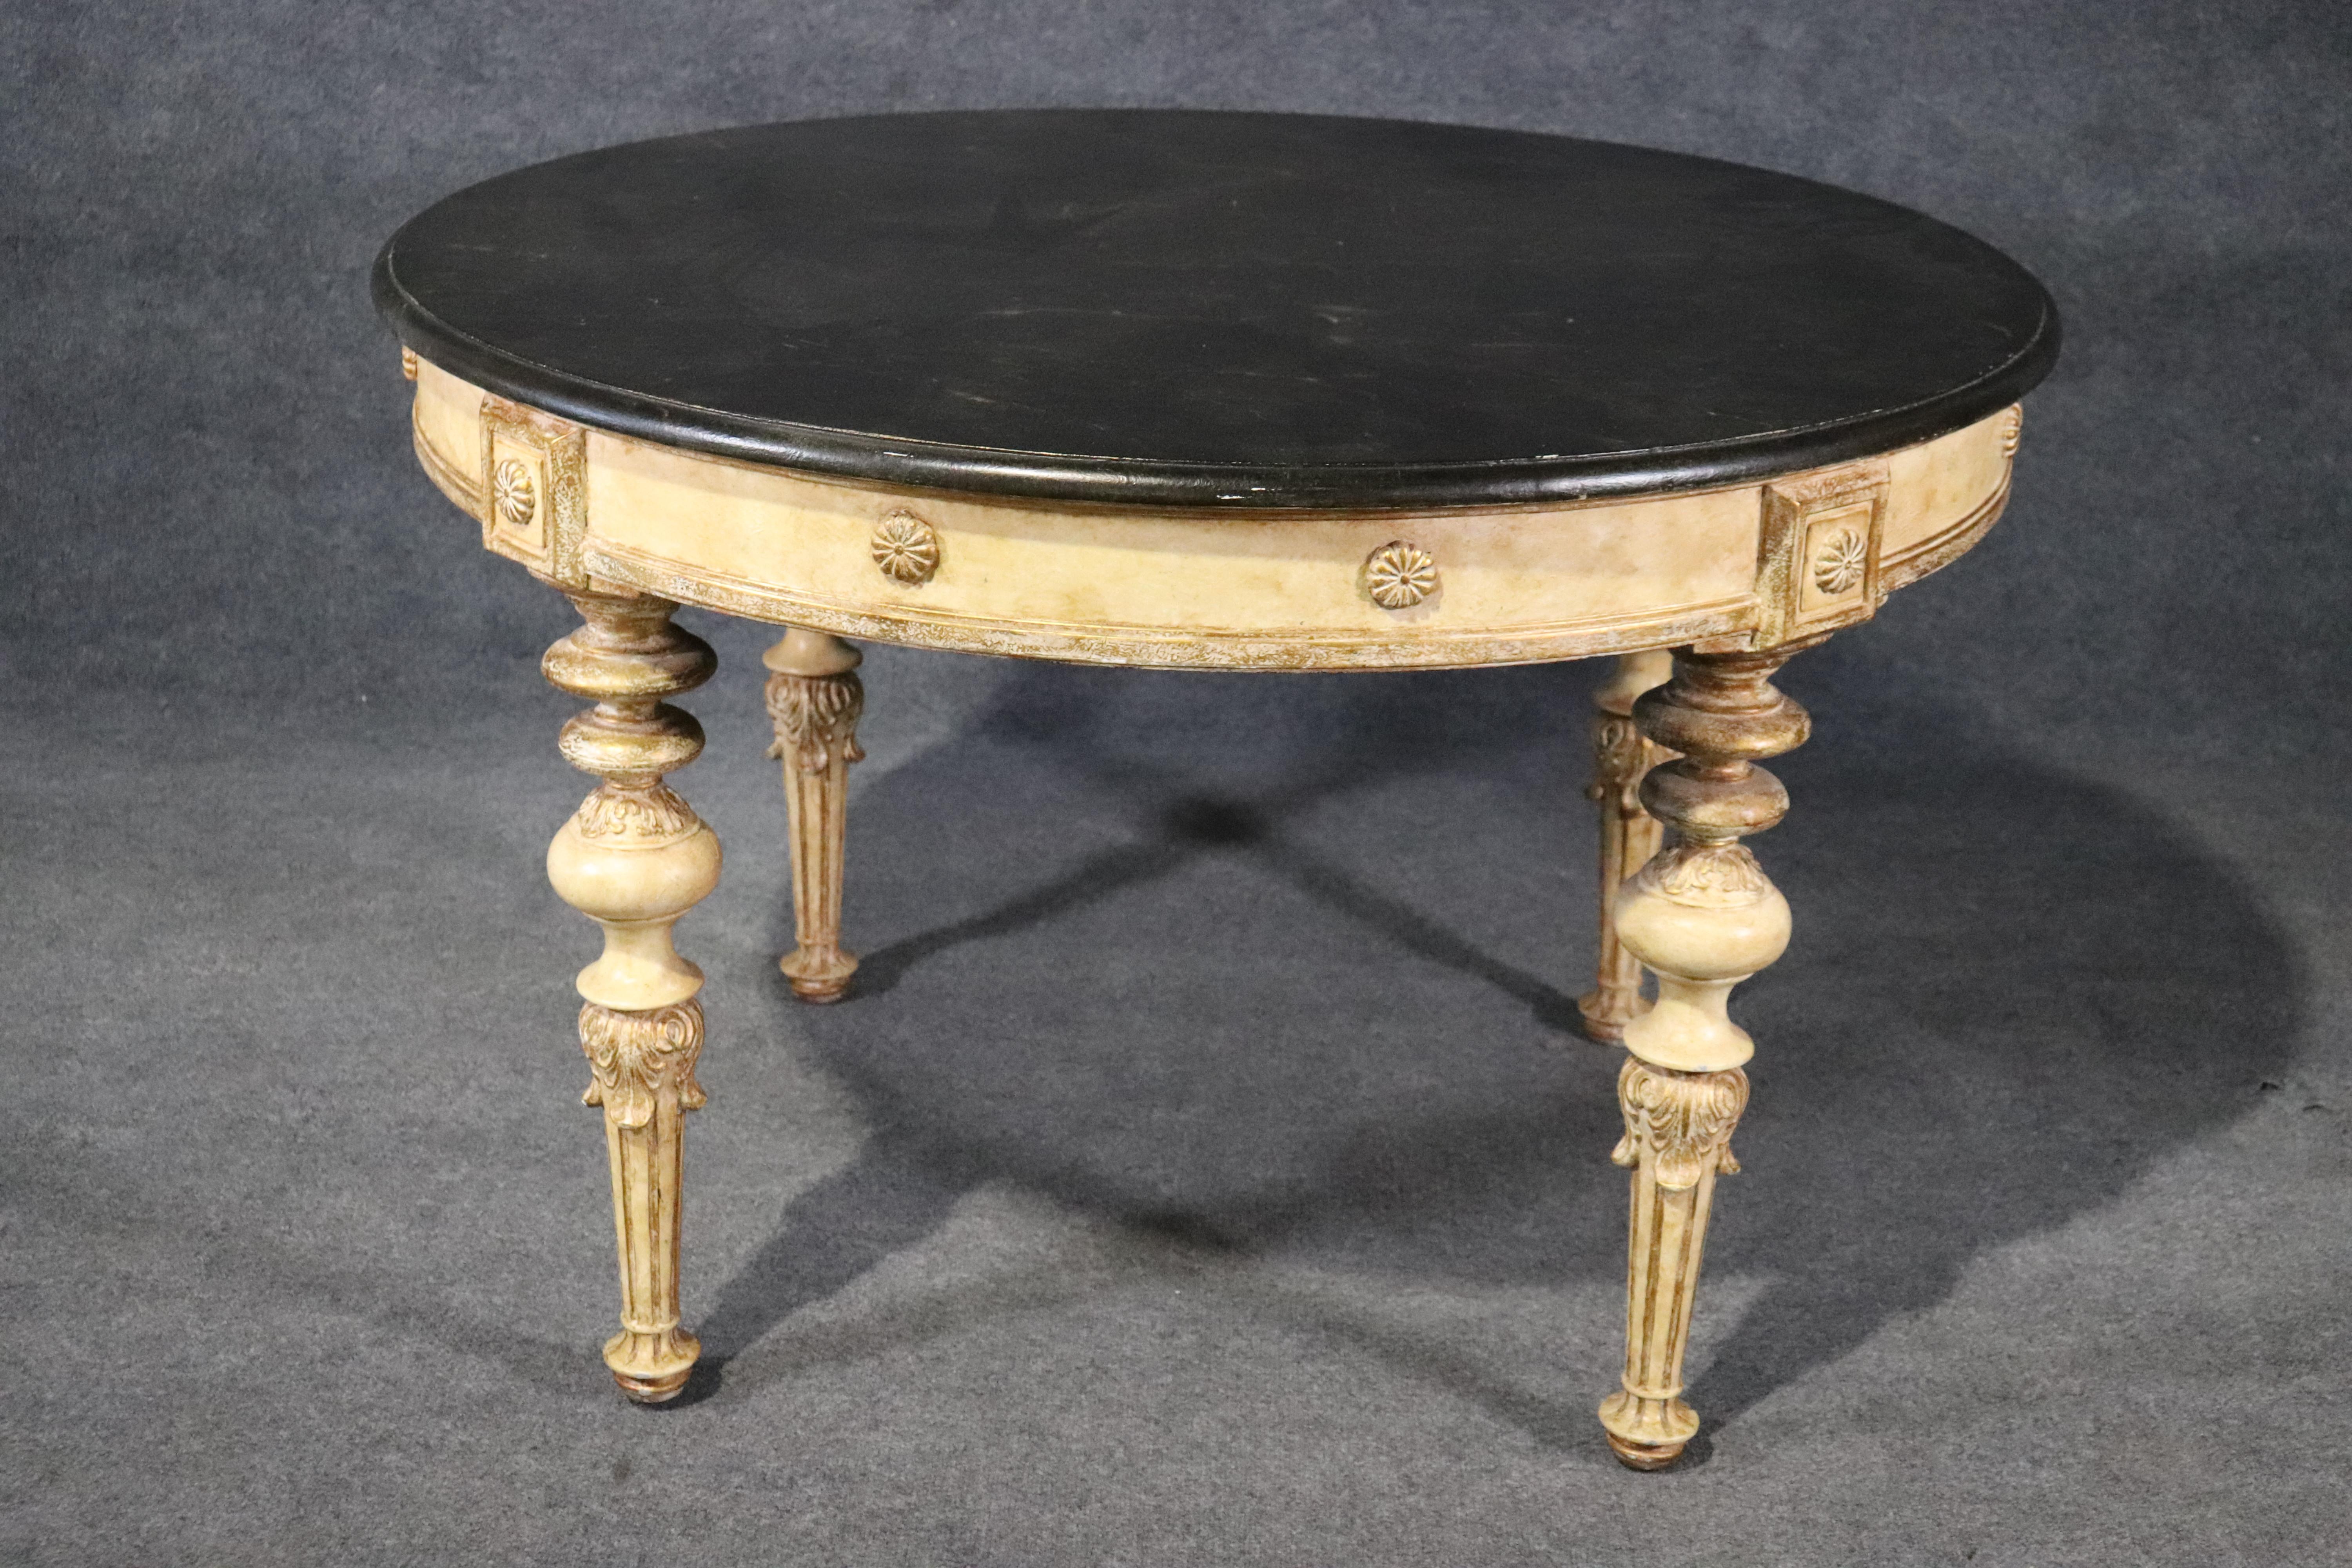 This is a gorgeous paint decorated table with a dark green faux marble top and gorgeous creme painted base with subtle hints of gold. The table is in very good condition and has no significant signs of wear or use. The table measures 48 x 48 x 31.5